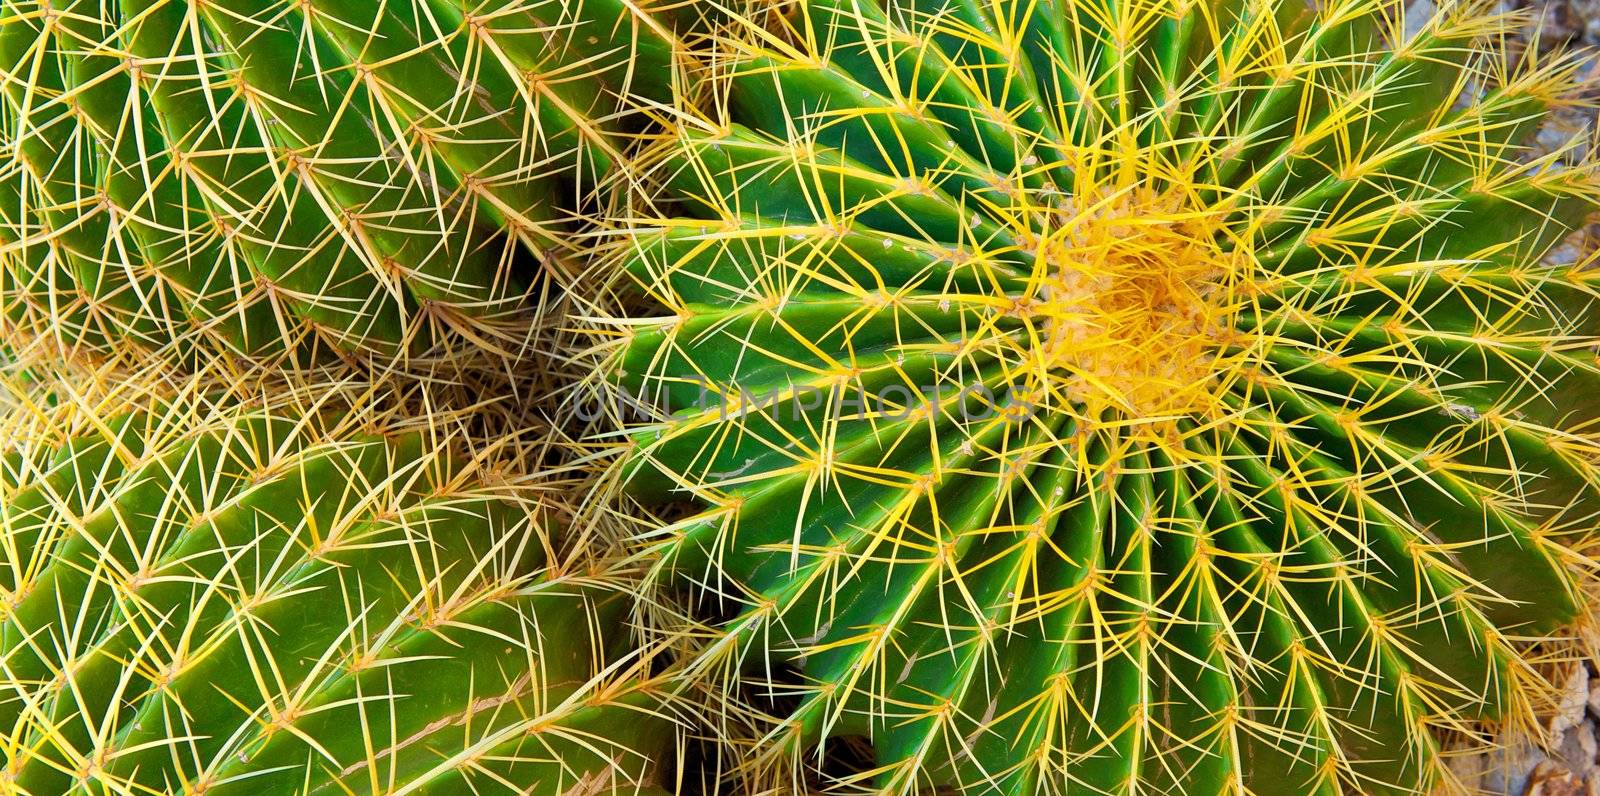 Barrel Cactus With Needles by pixelsnap